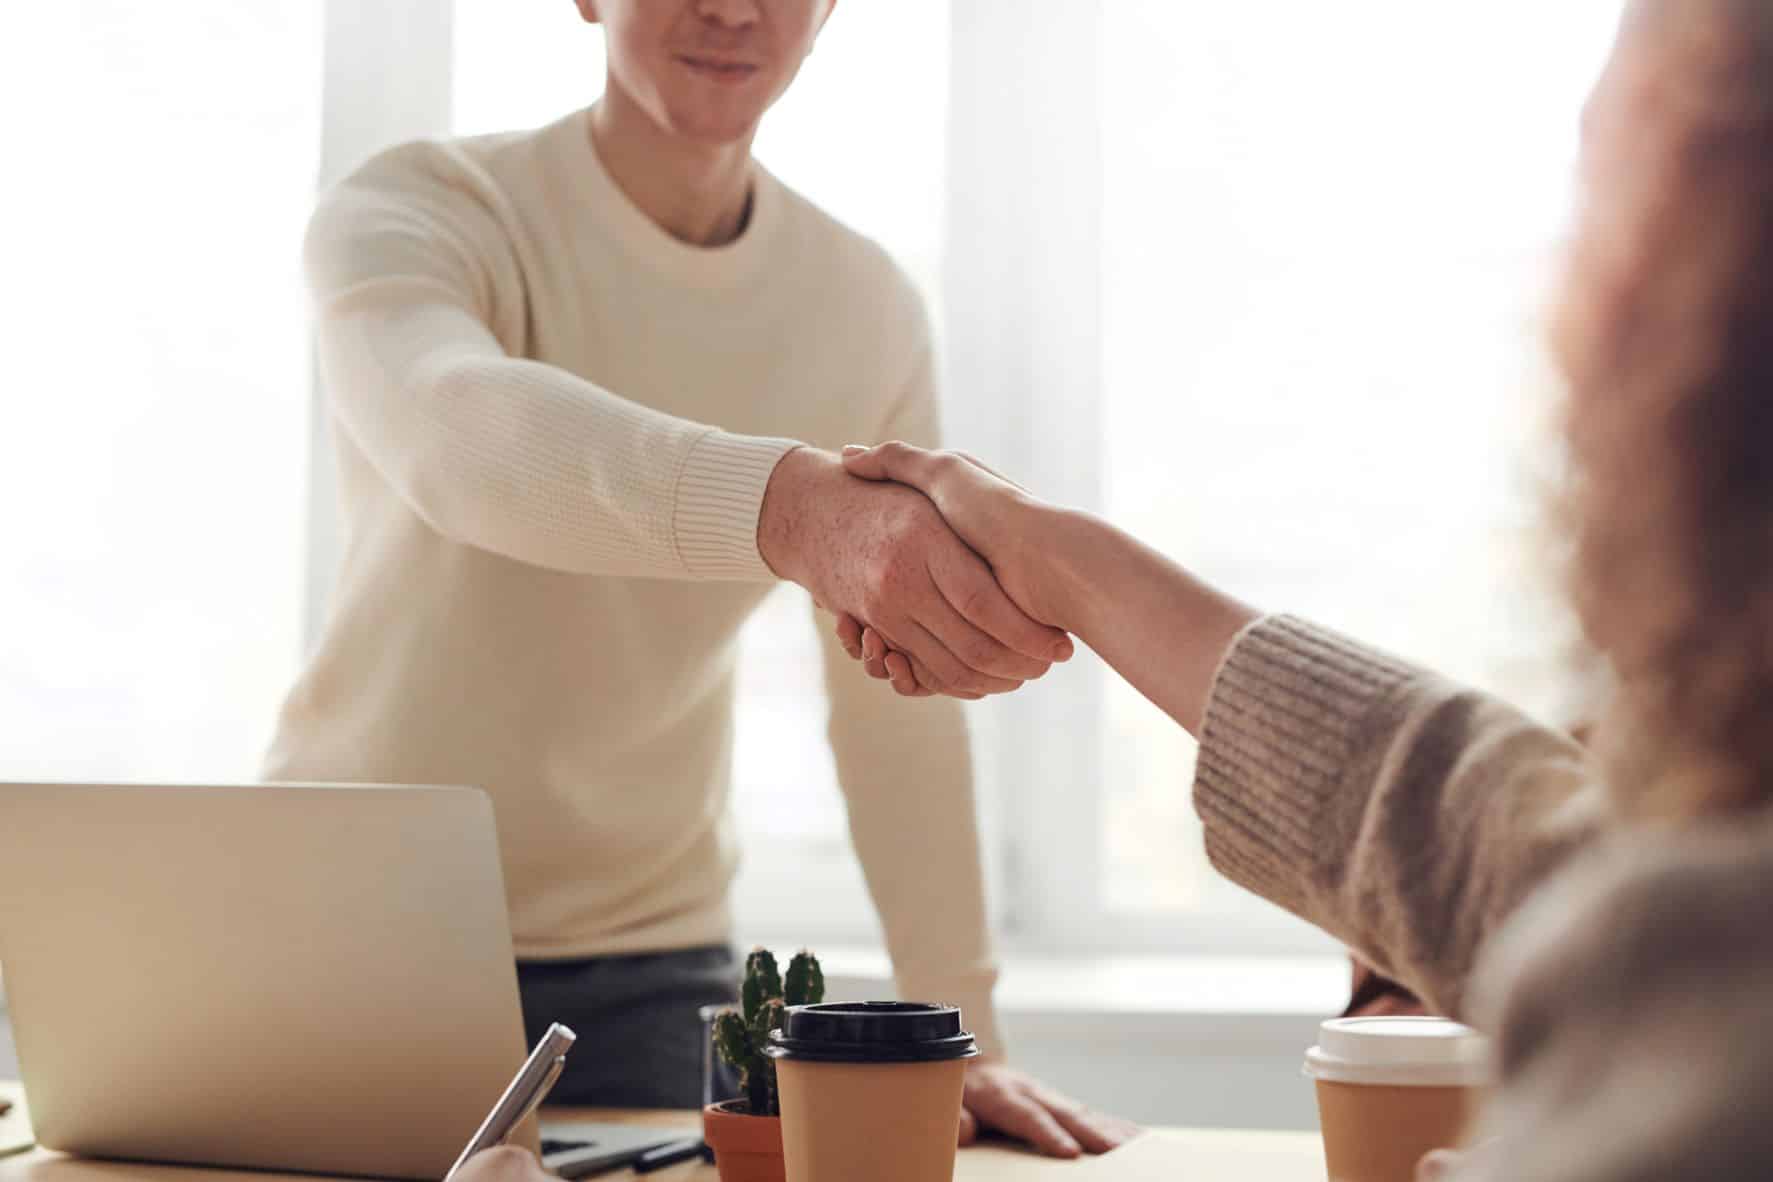 two people shaking hands over an office desk